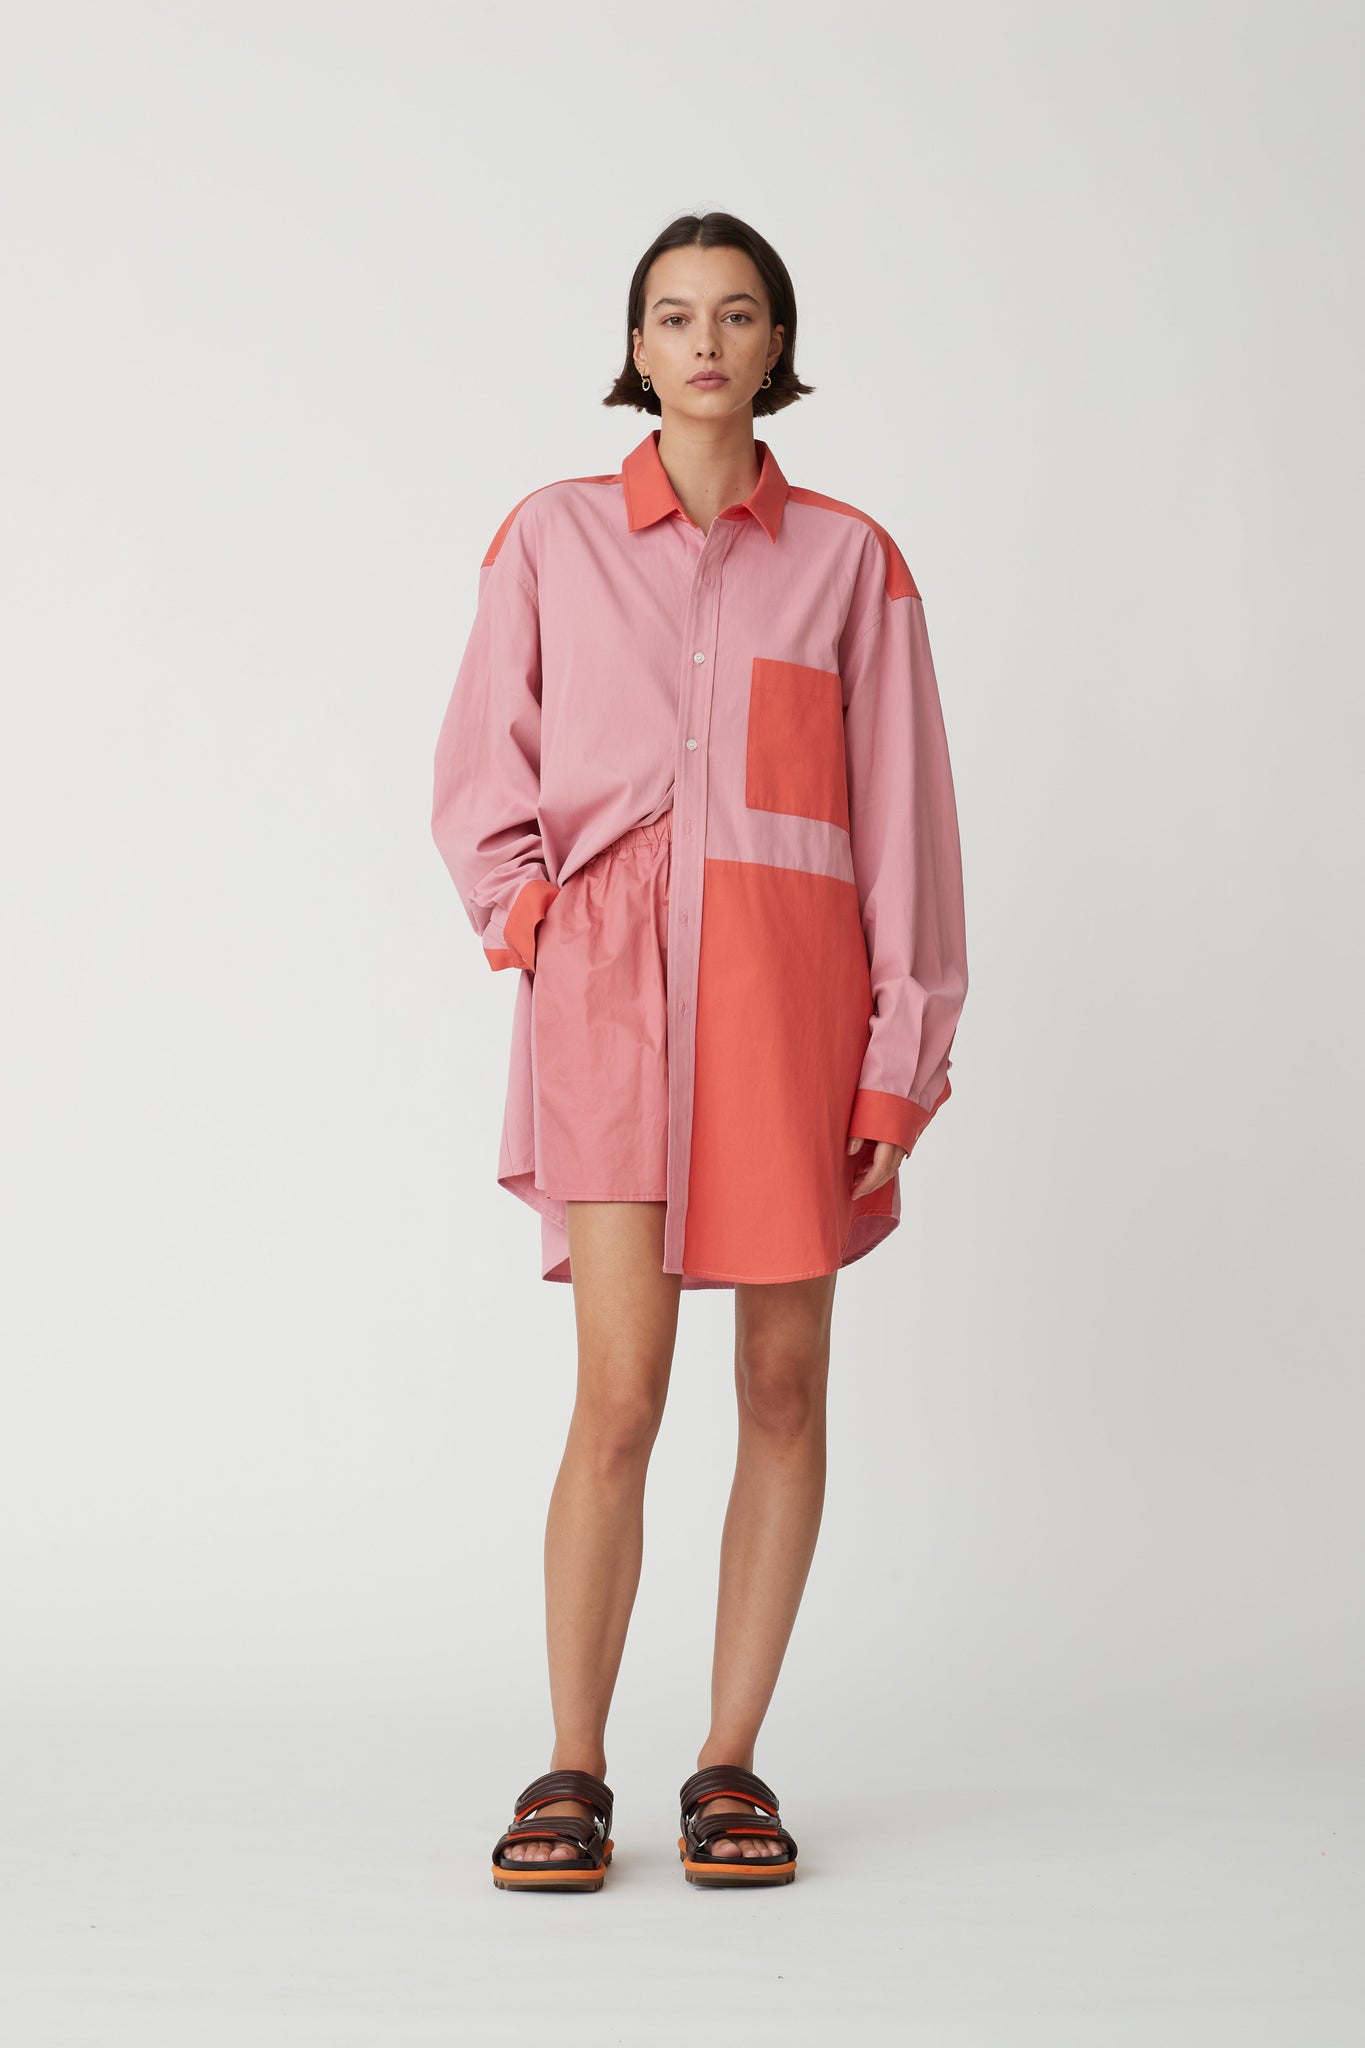 Pascal Shirt in Red/Pink